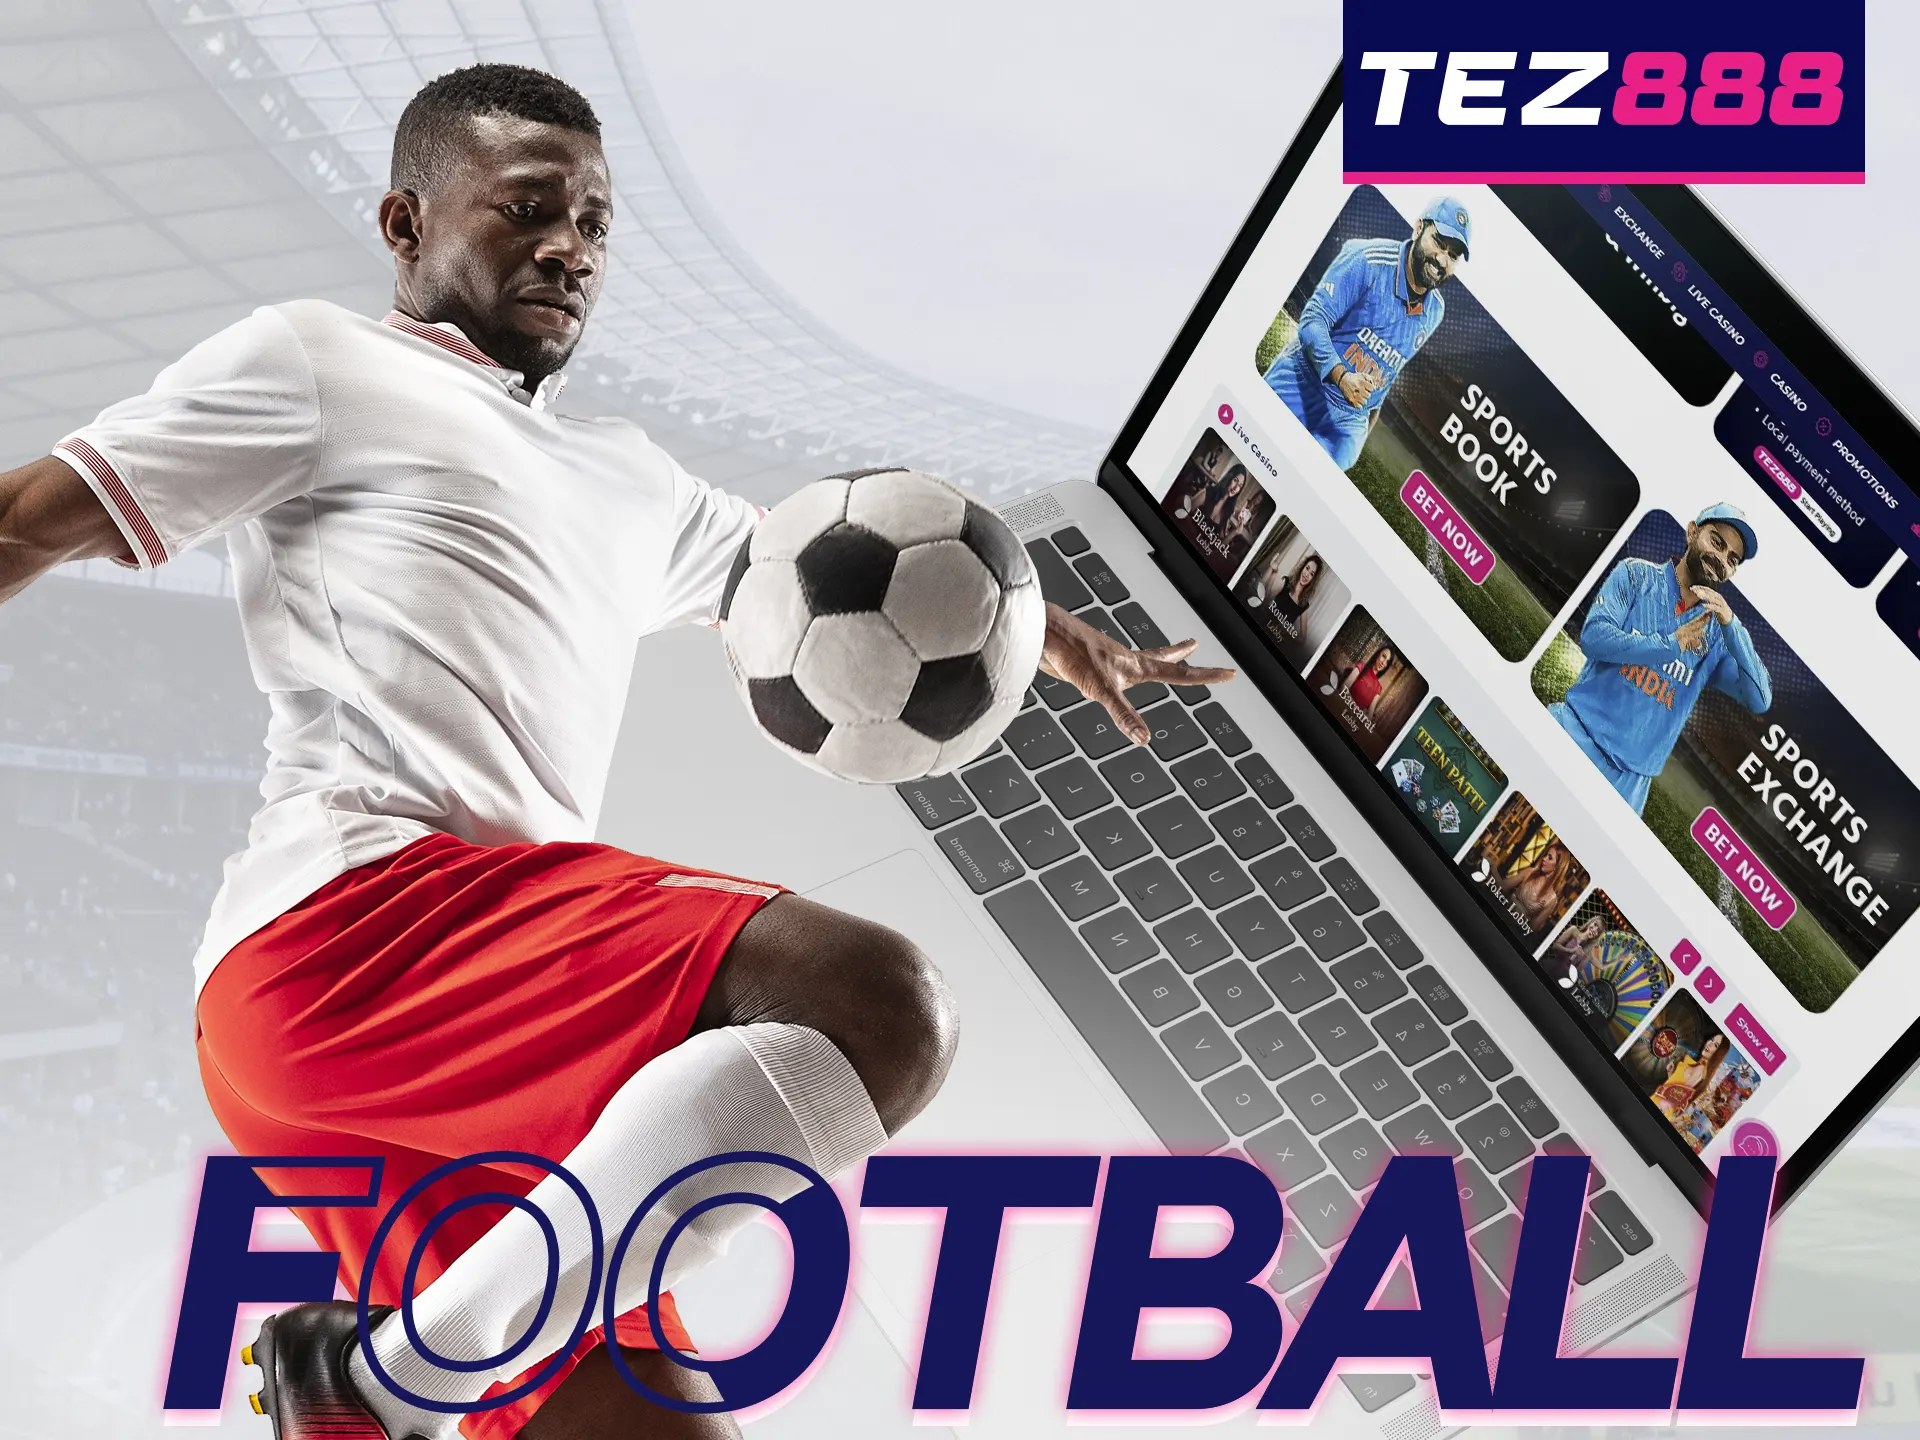 Place your bets on your favourite football matches at Tez888.